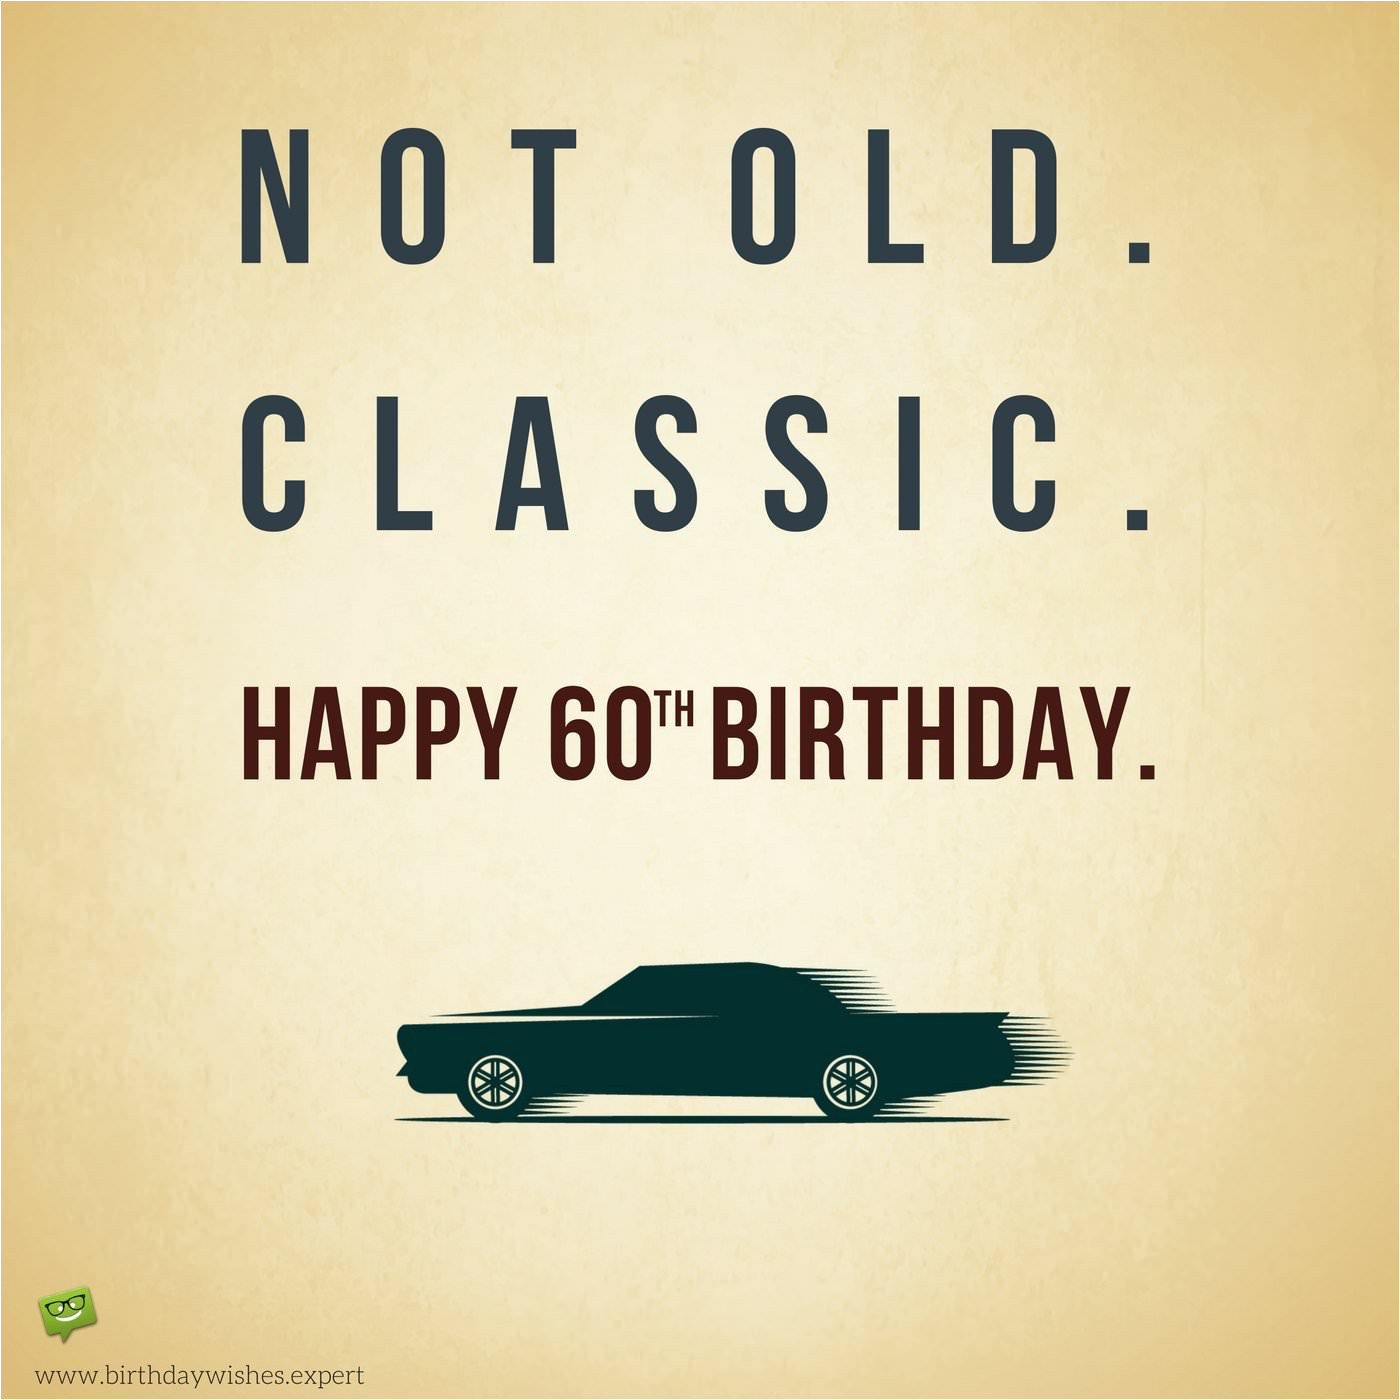 not old classic happy birthday wish on image with vintage car jpg